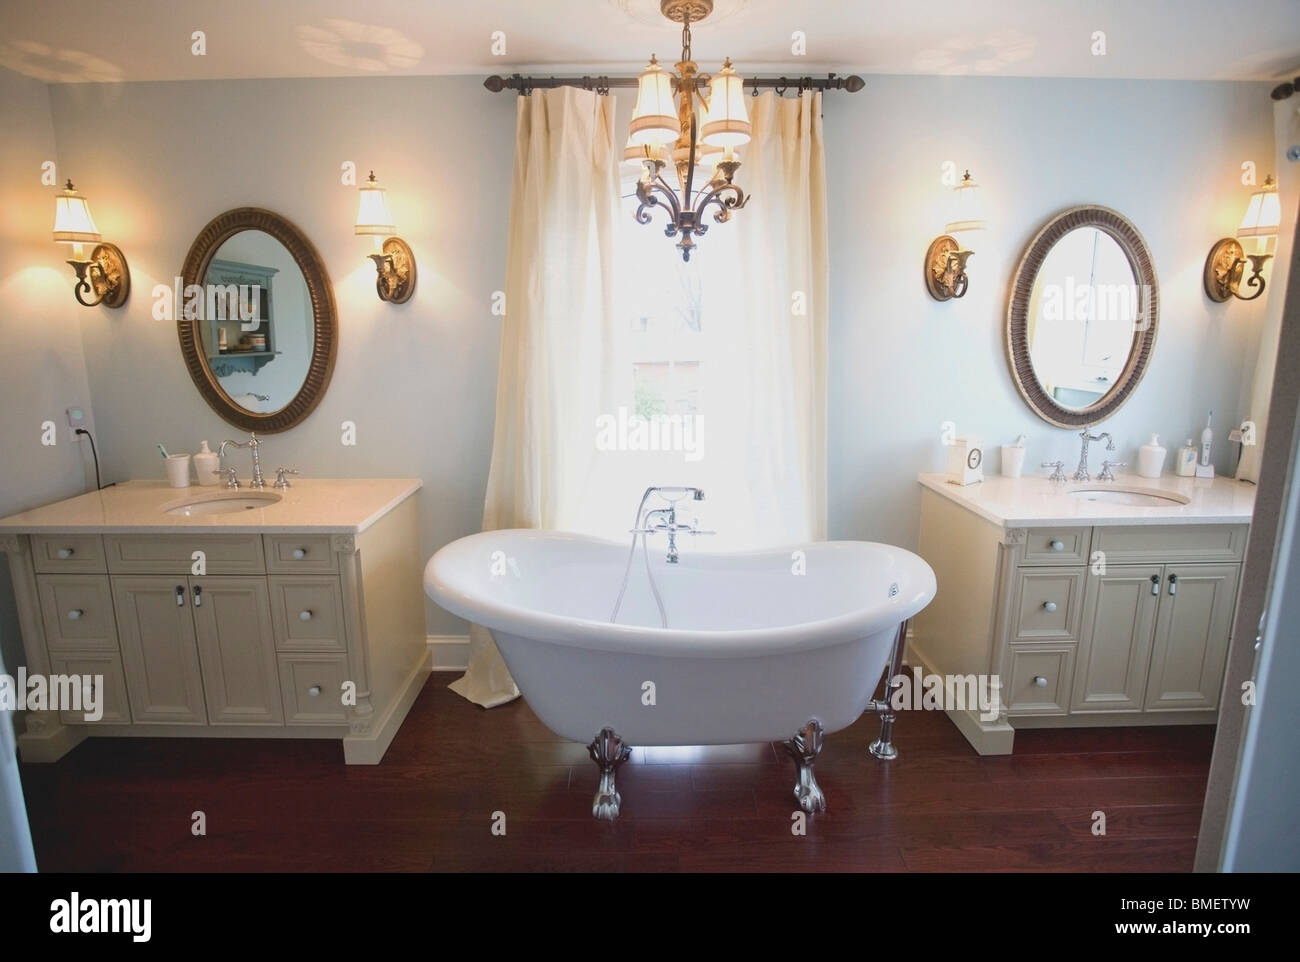 A Bathroom With Double Sinks And A Clawfoot Tub Stock Photo